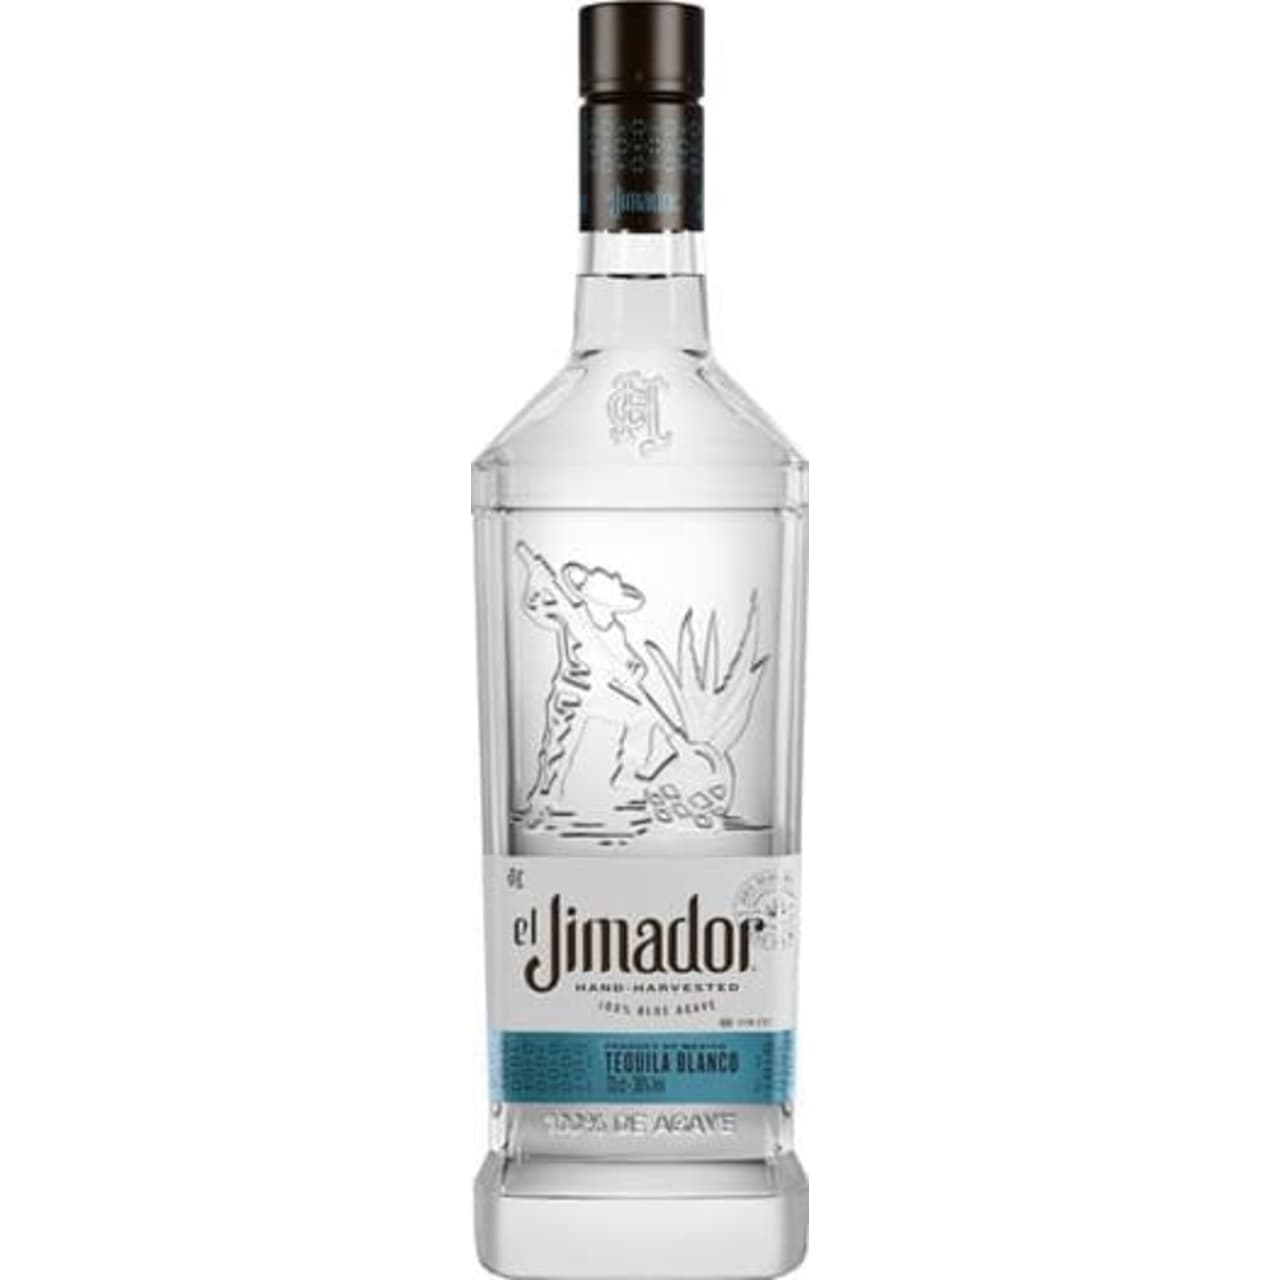 El Jimador Blanco is bottled fresh, straight after the second distillation into the bottle to preserve the fresh natural agave aromas and clean, smooth taste.